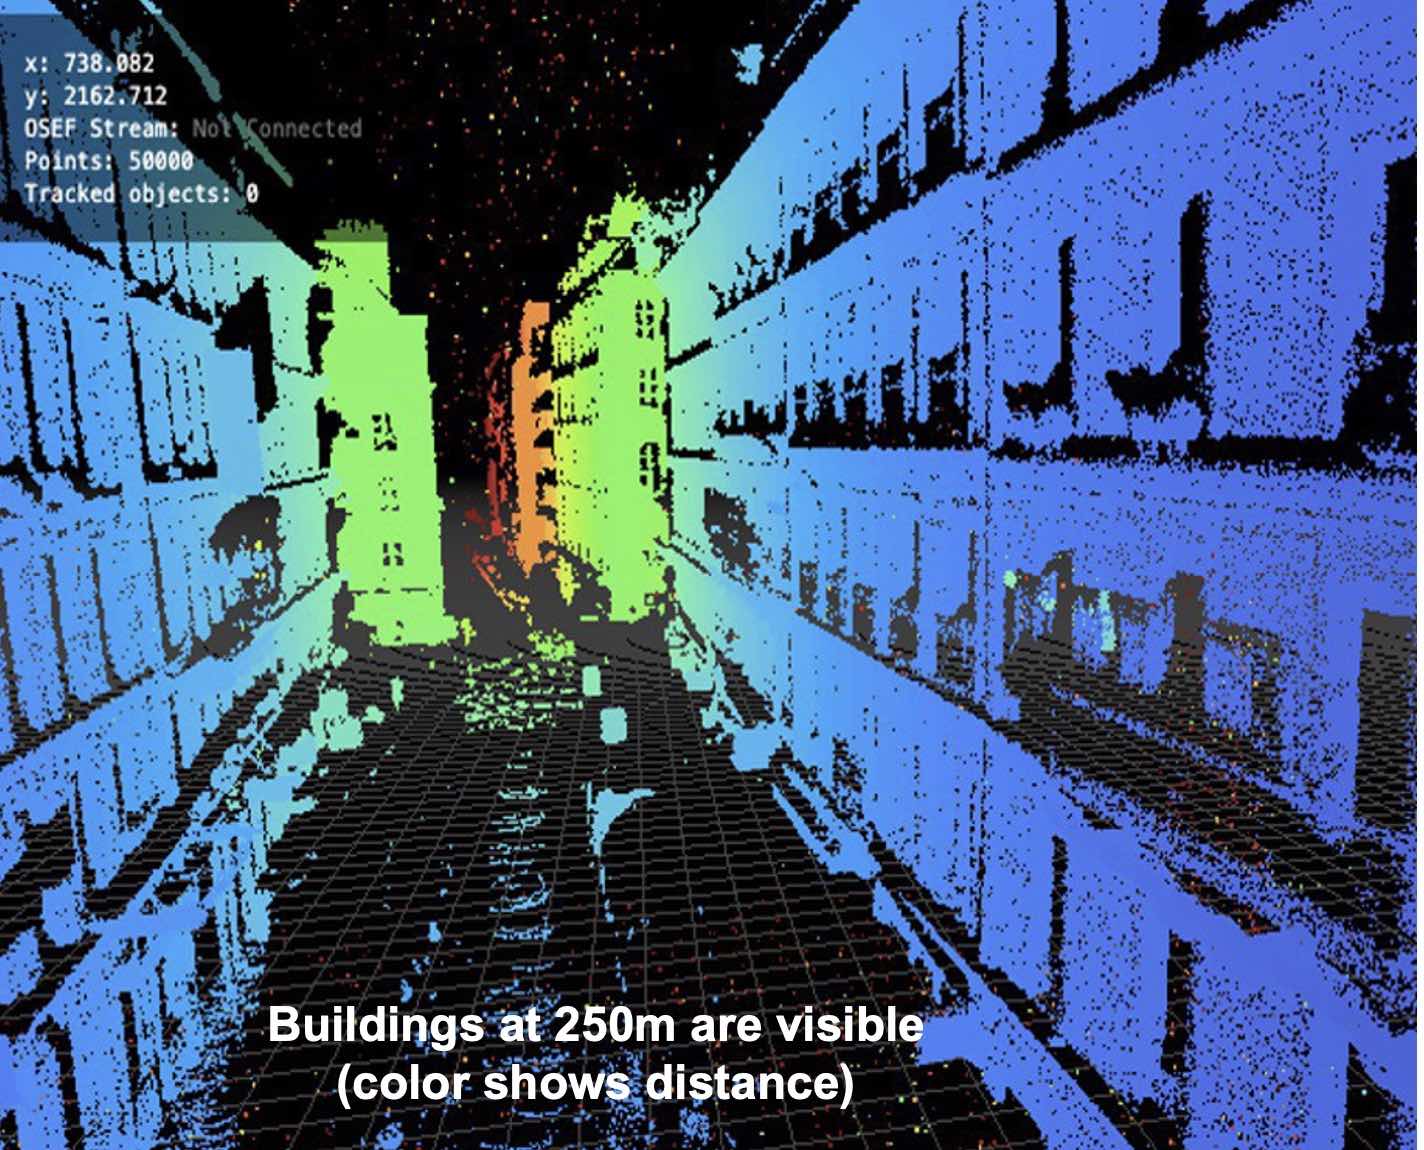 Iridesense Multispectral Lidar 3D view of a long street with buildings at 250m